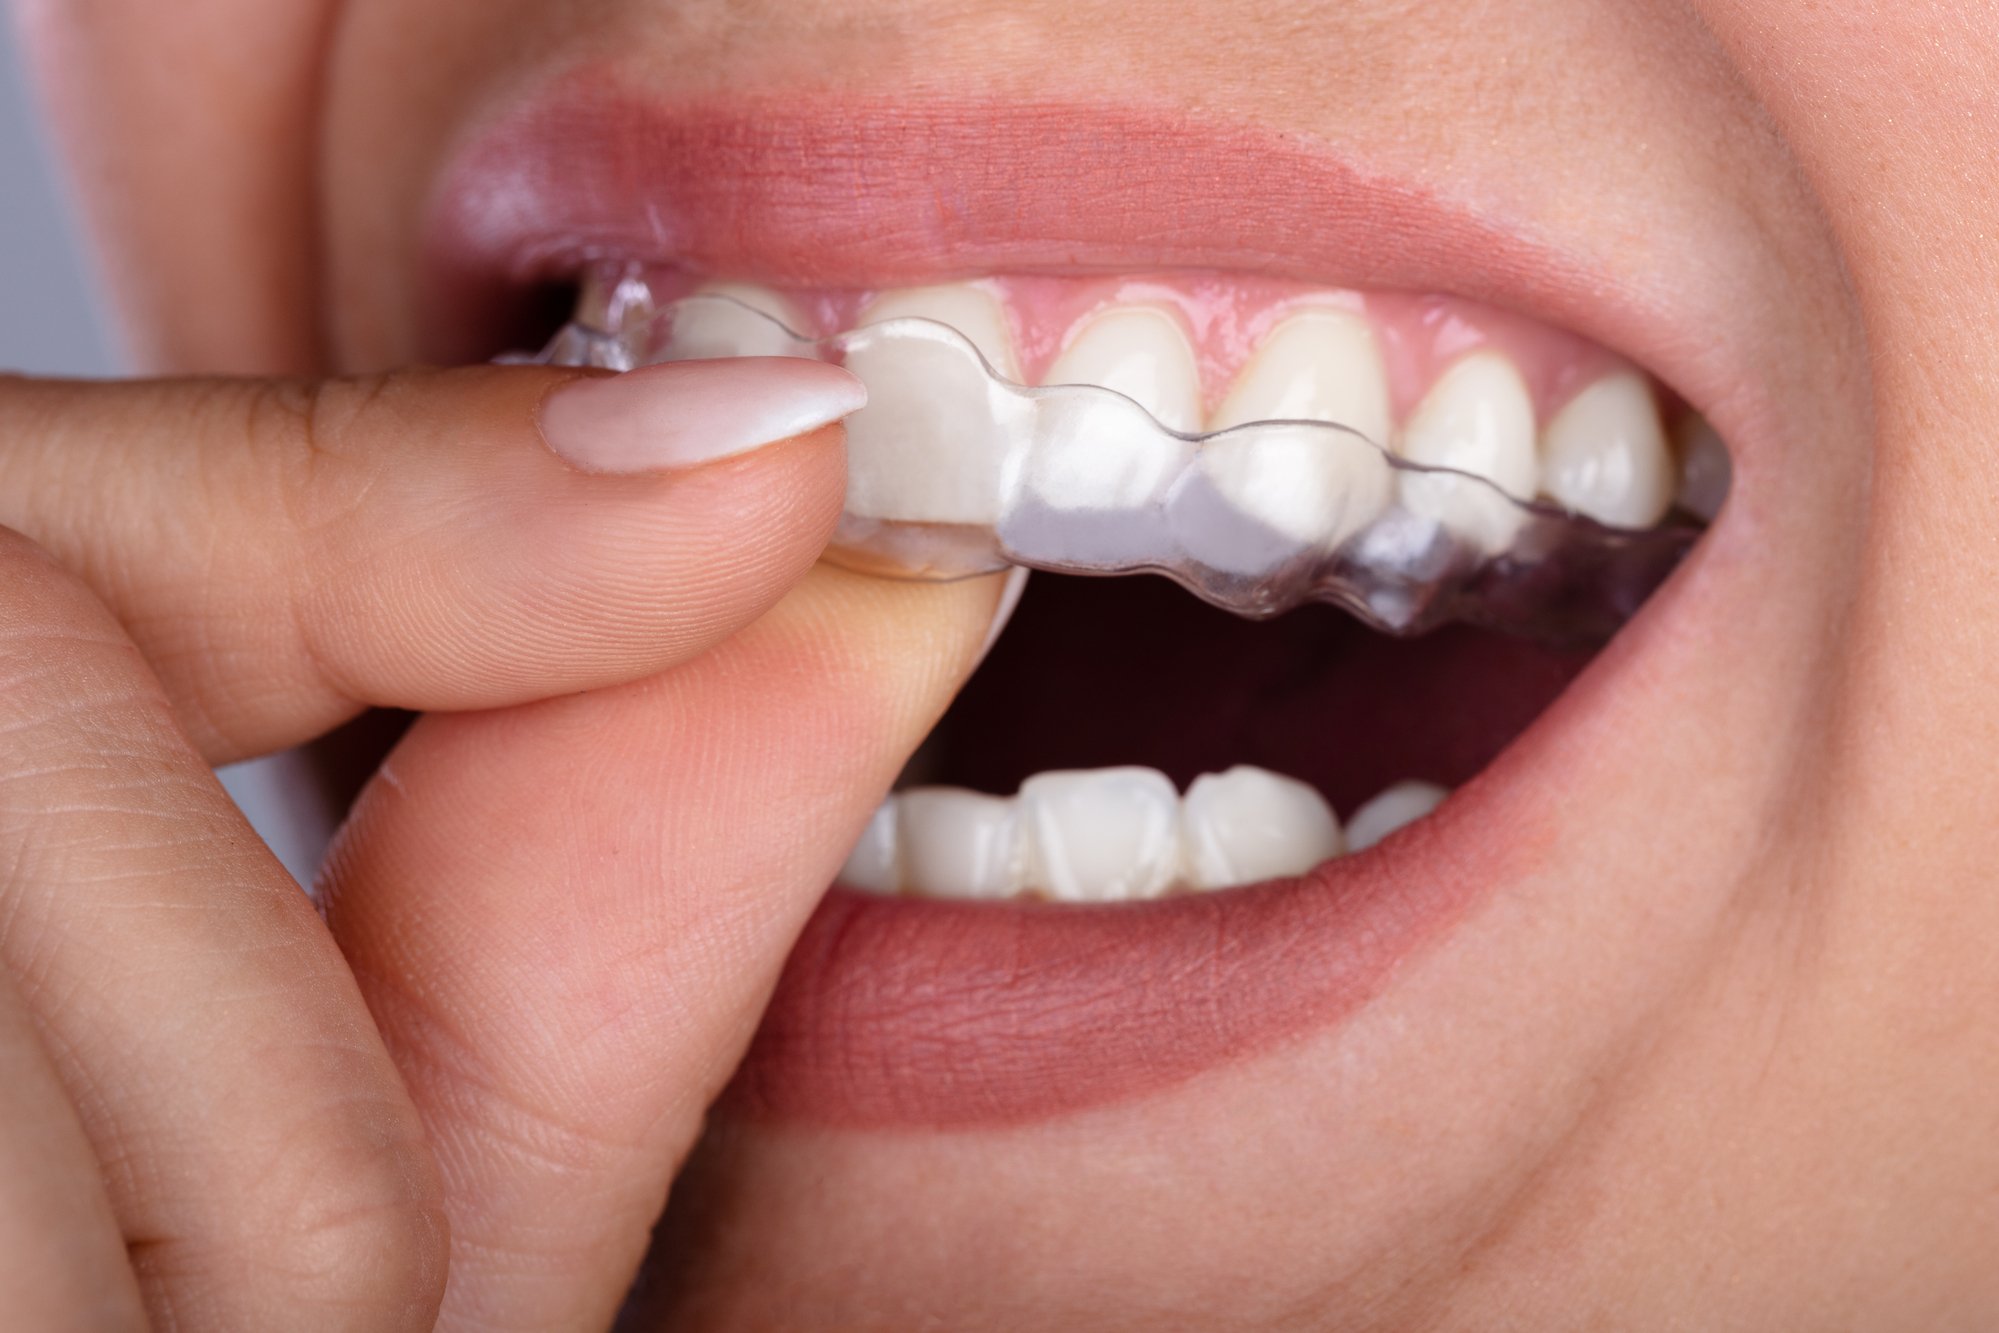 woman placing Invisalign aligners in mouth